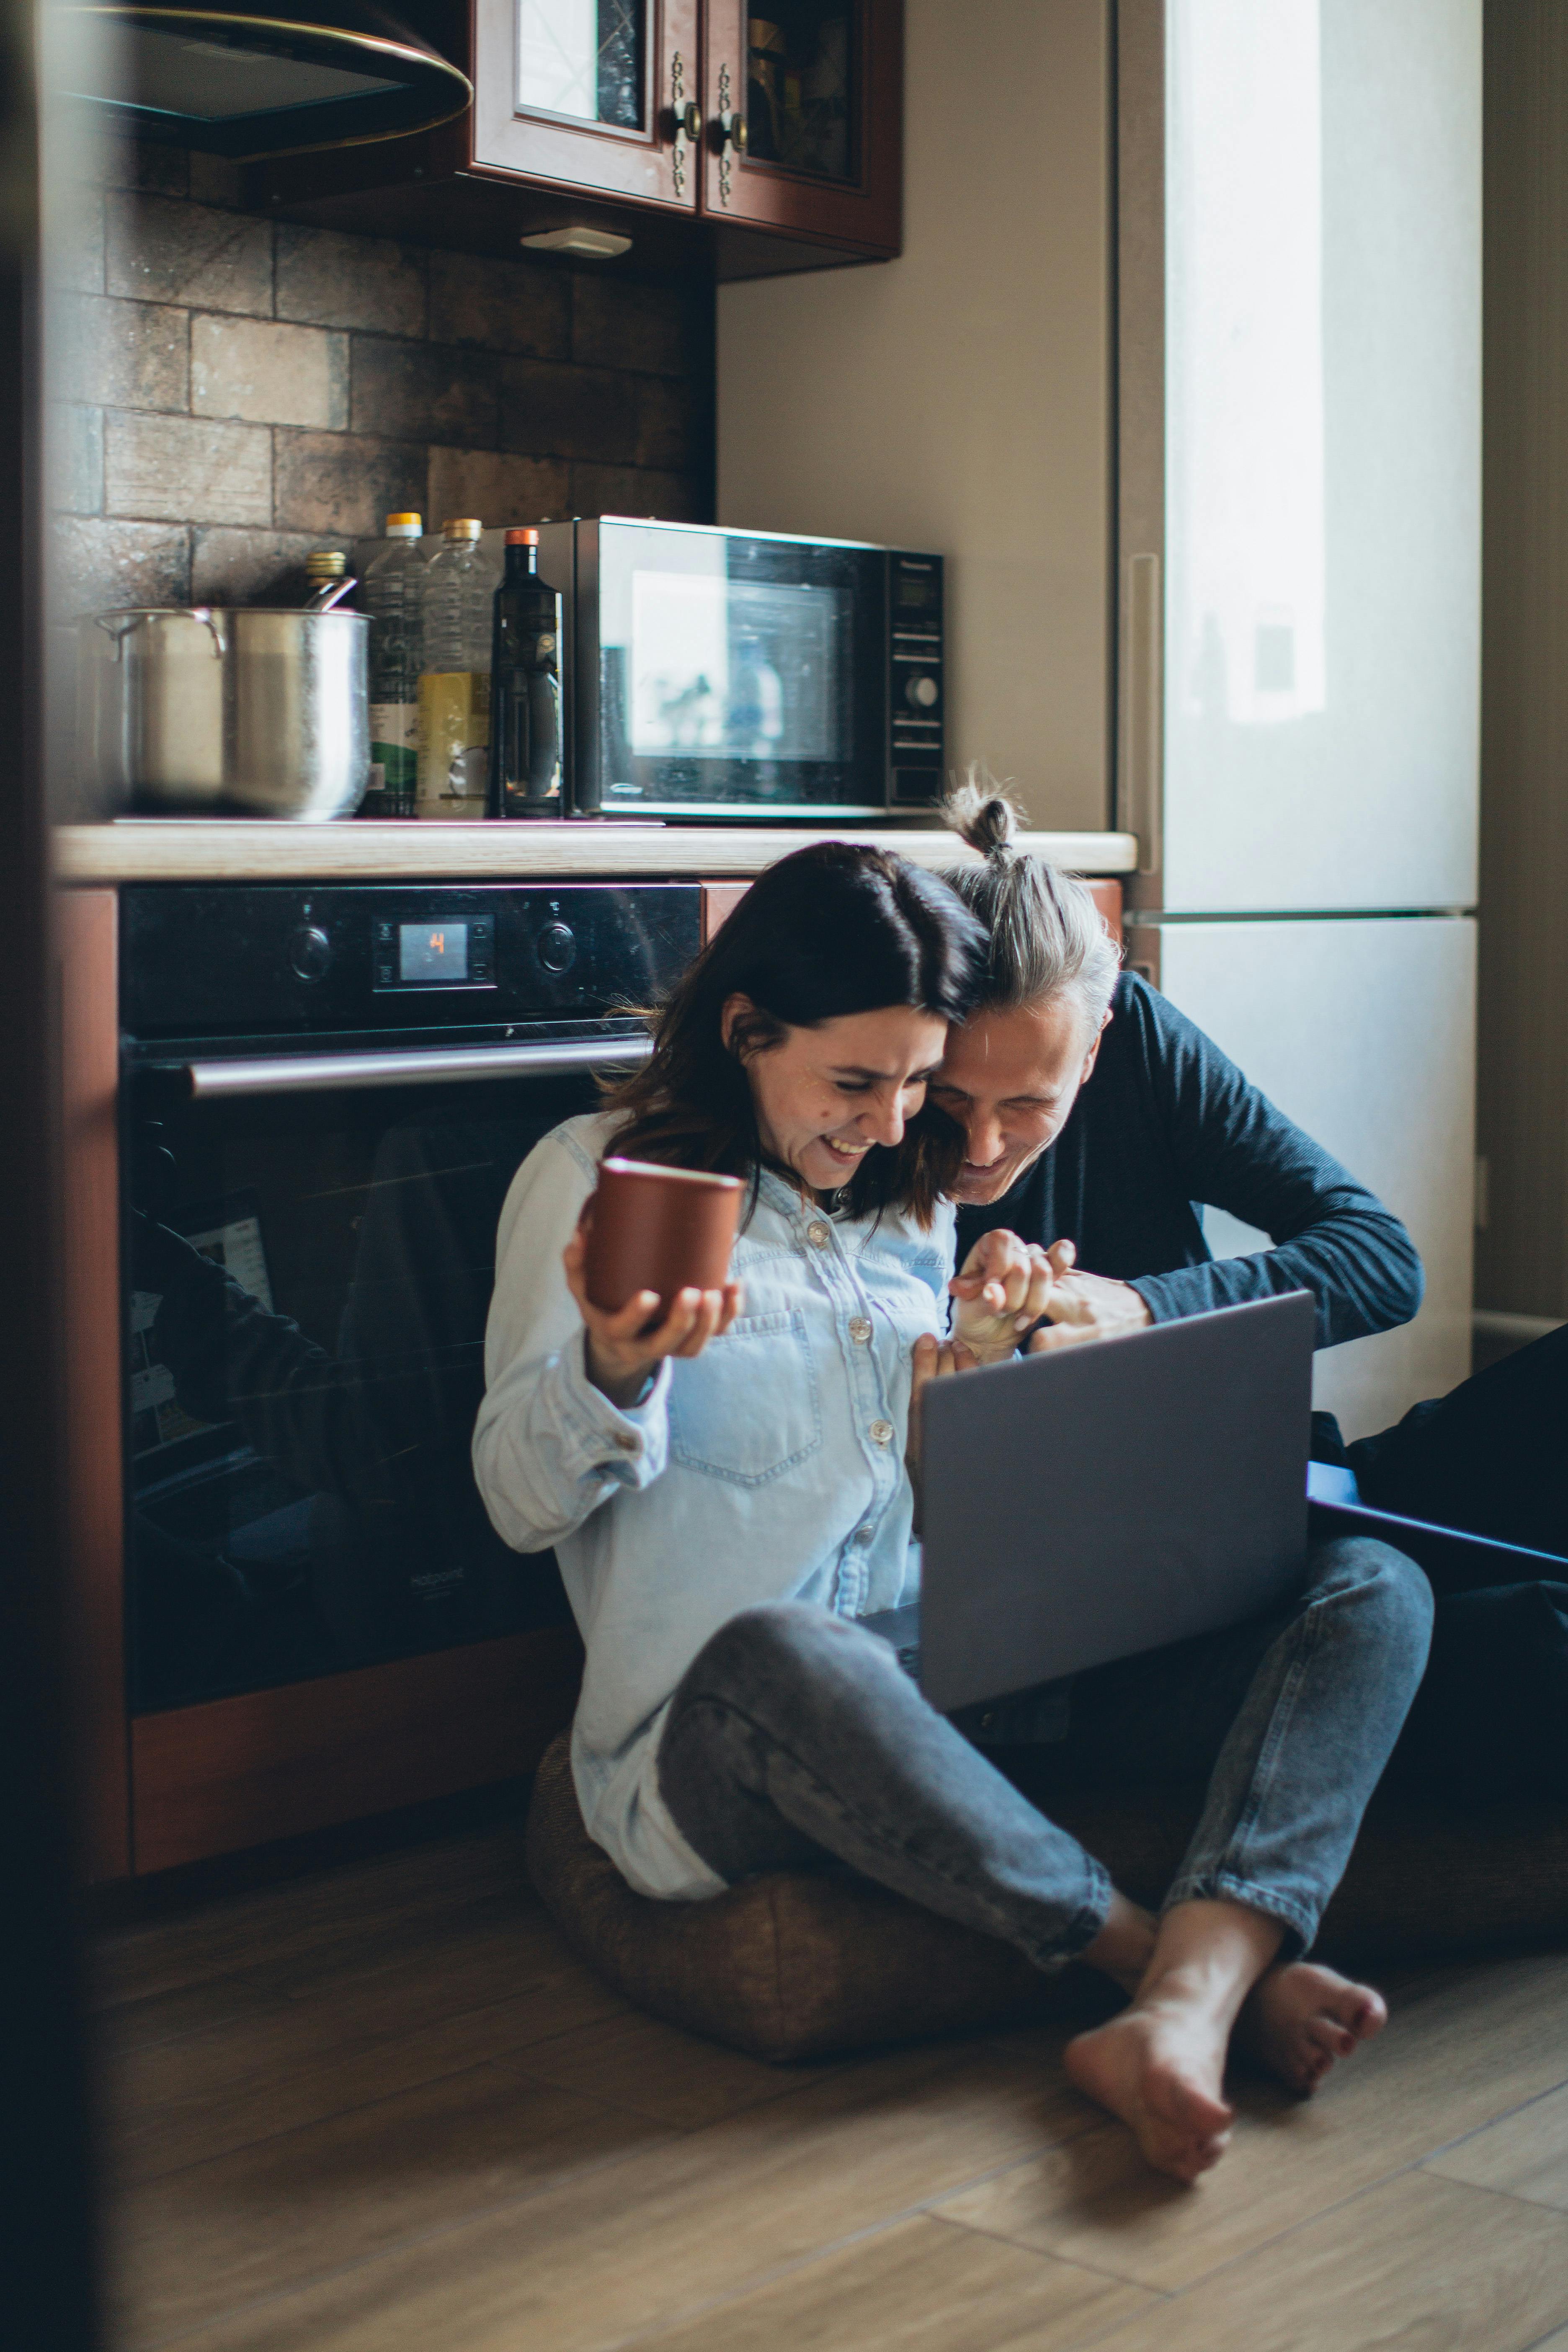 A couple enjoying time on the internet | Source: Pexels